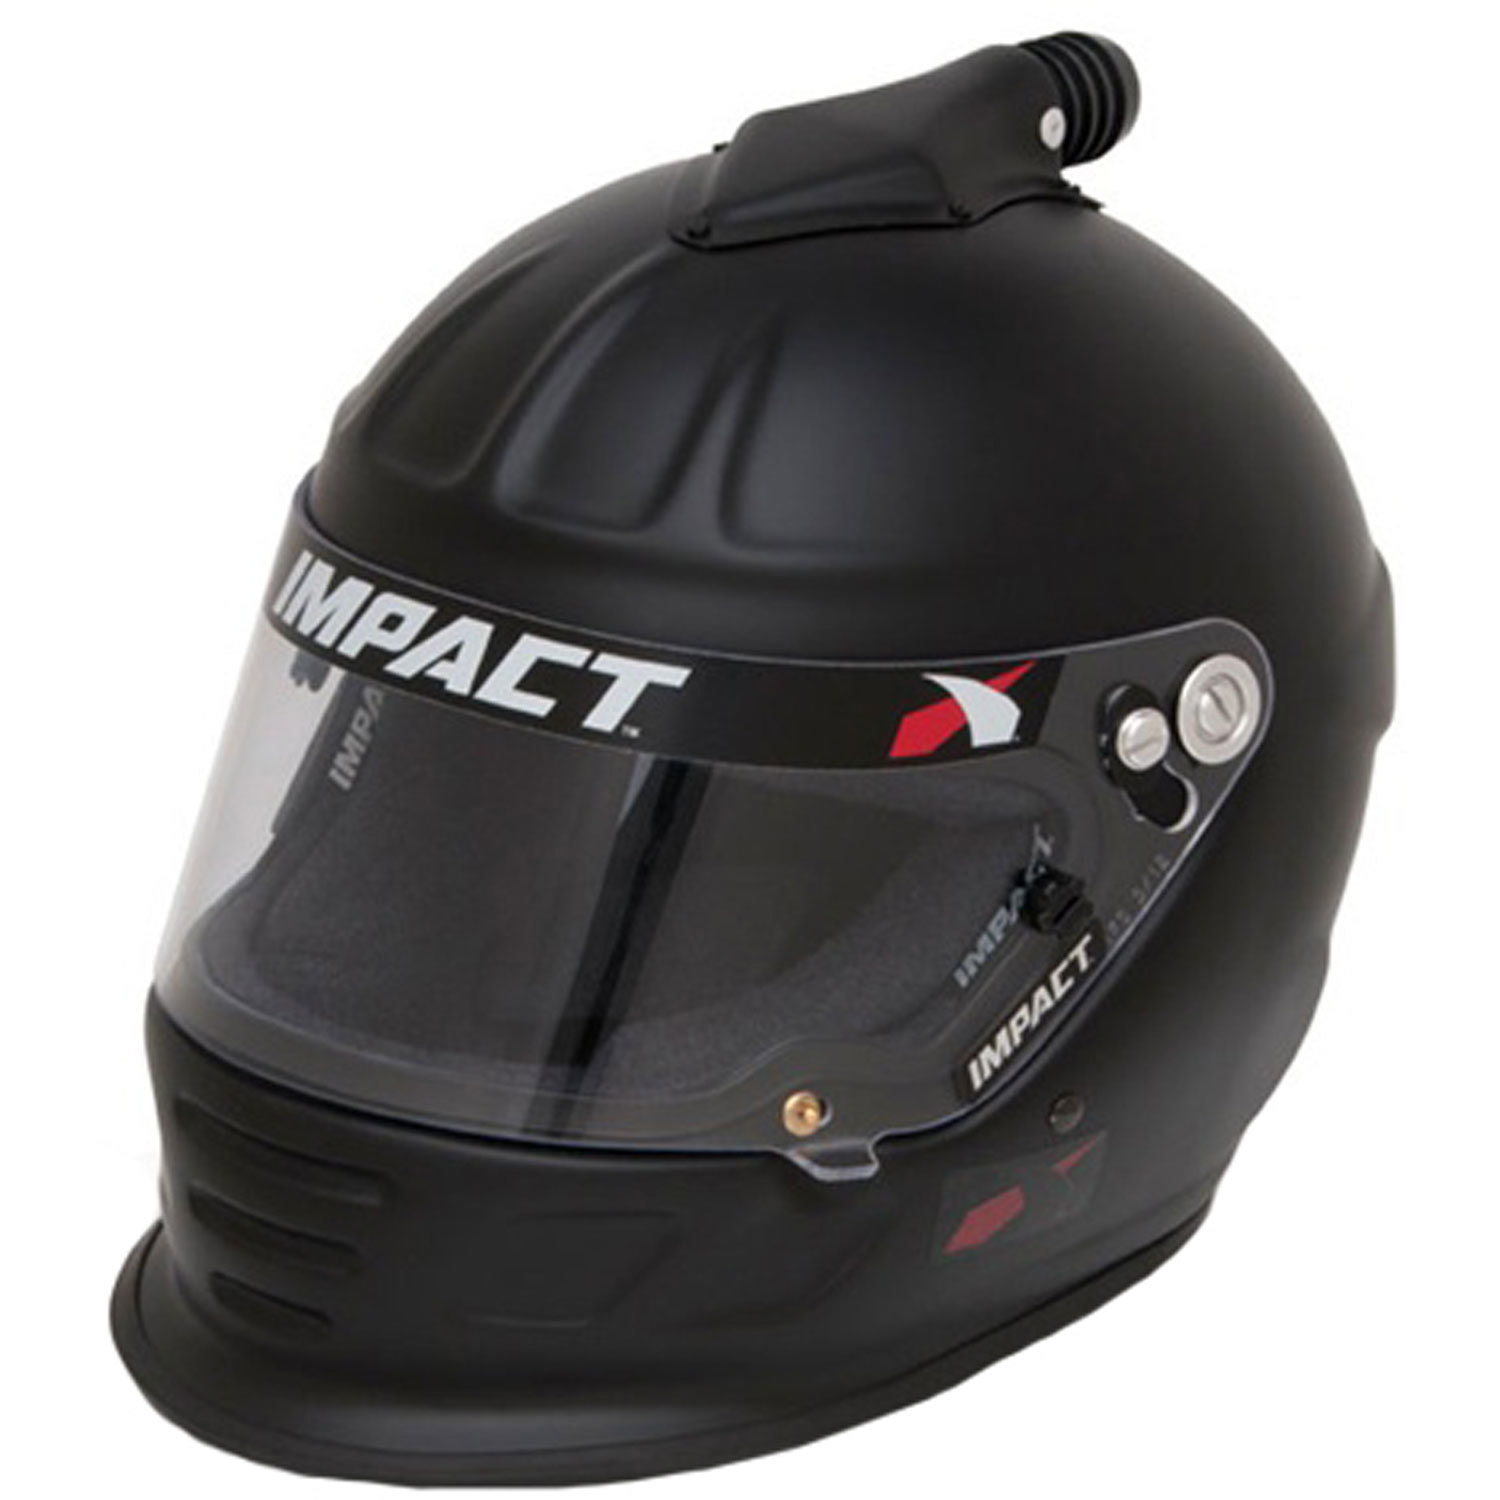 IMPACT RACING Helmet, Air Draft, Snell SA2015, Head and Neck Support Ready, Flat Black, X-Large, Each